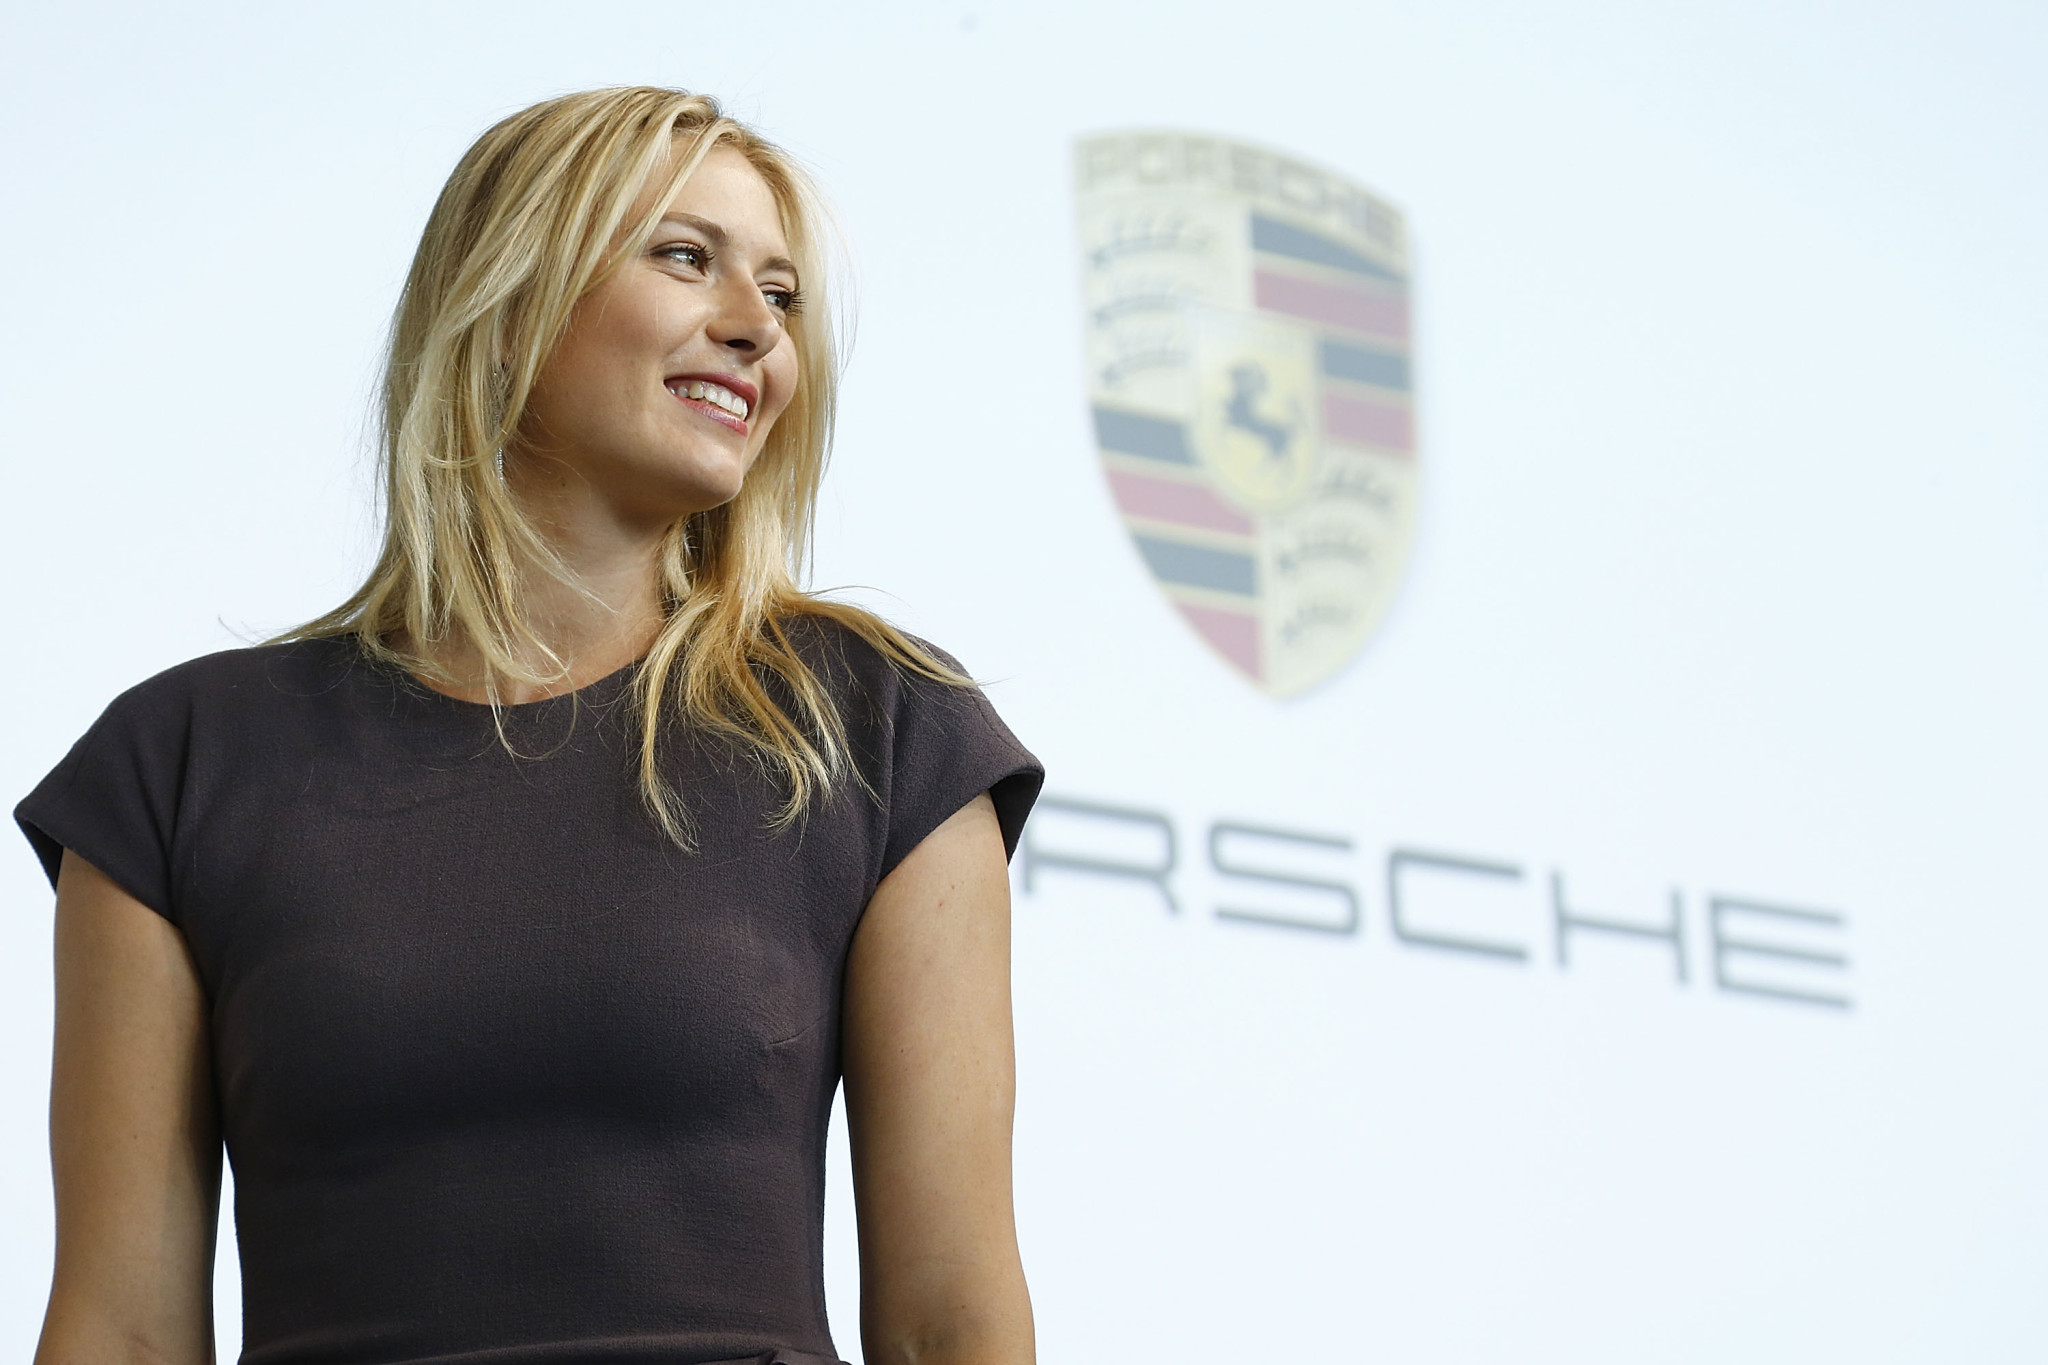 Maria Sharapova looks hot wearing a tight gray dress at the Porche event in Stut #75234364